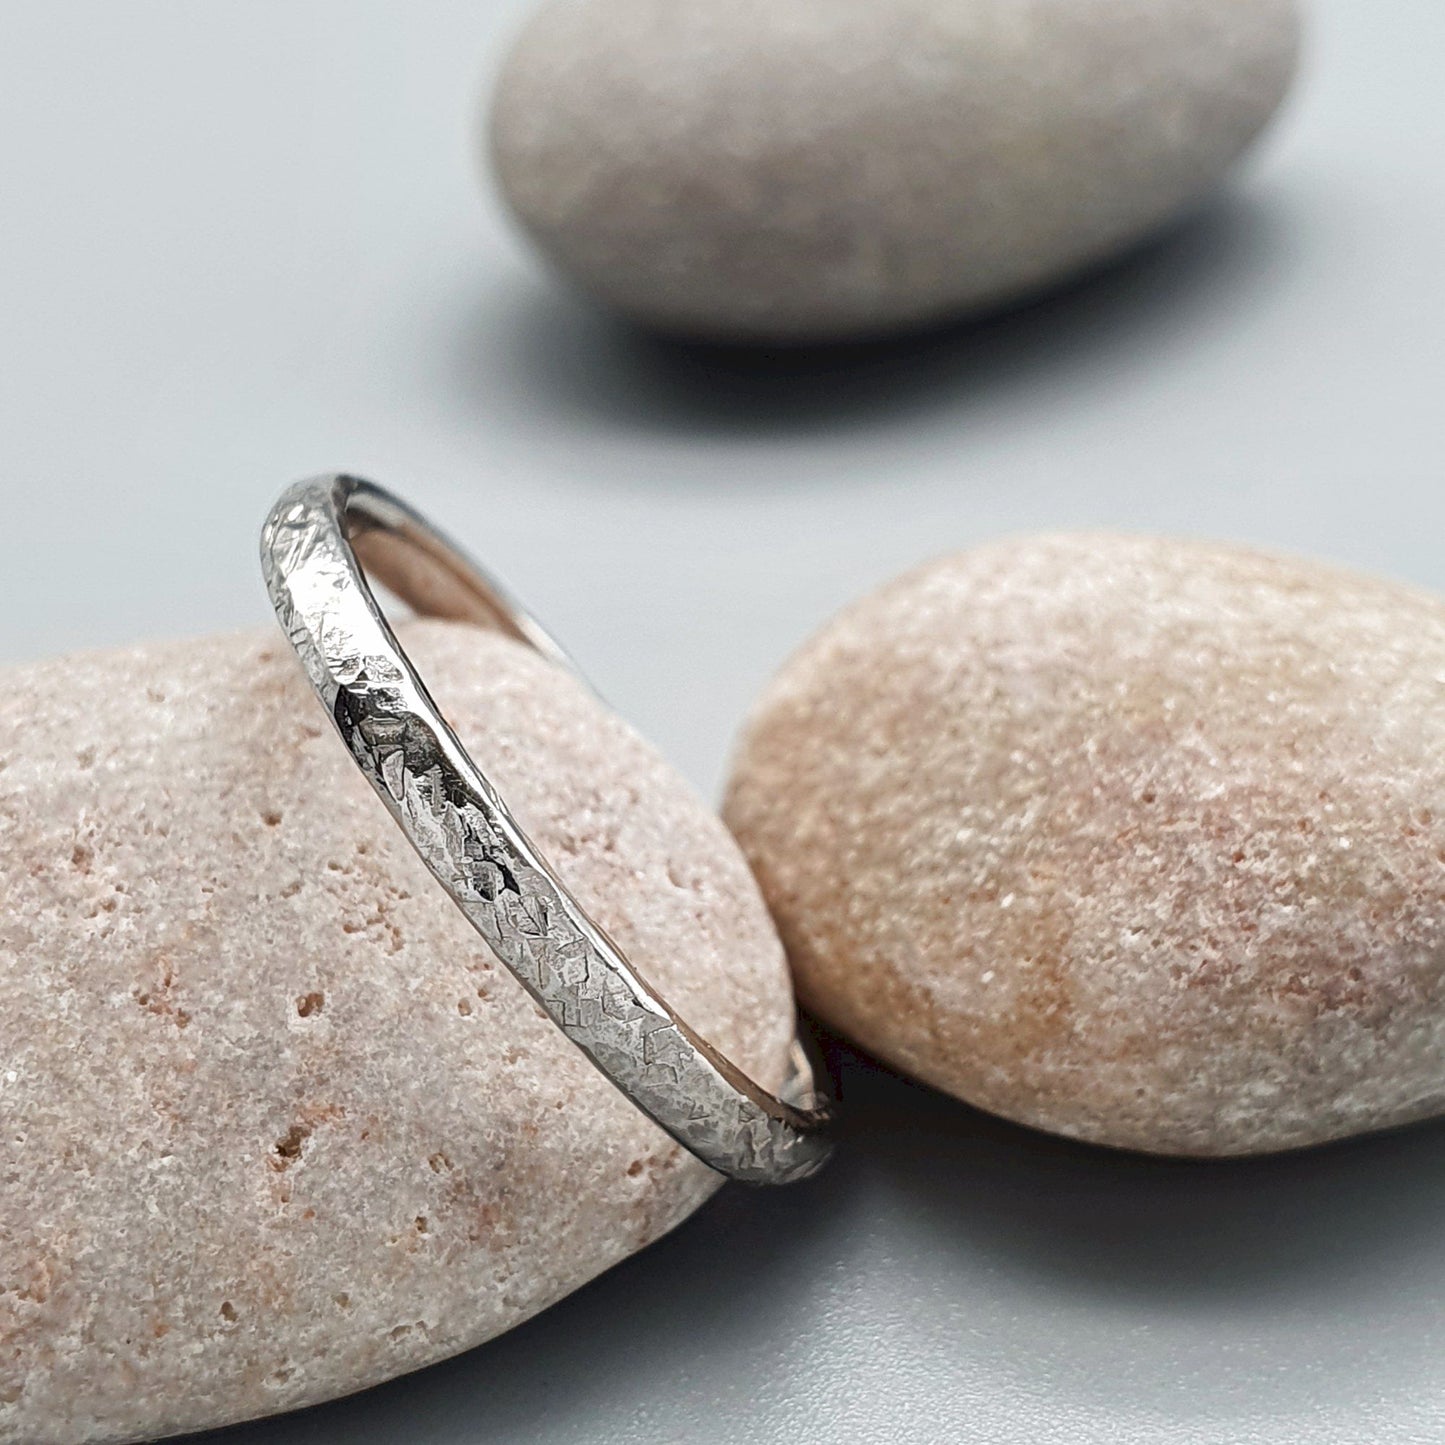 Wedding ring, thin white gold Fire hammered design